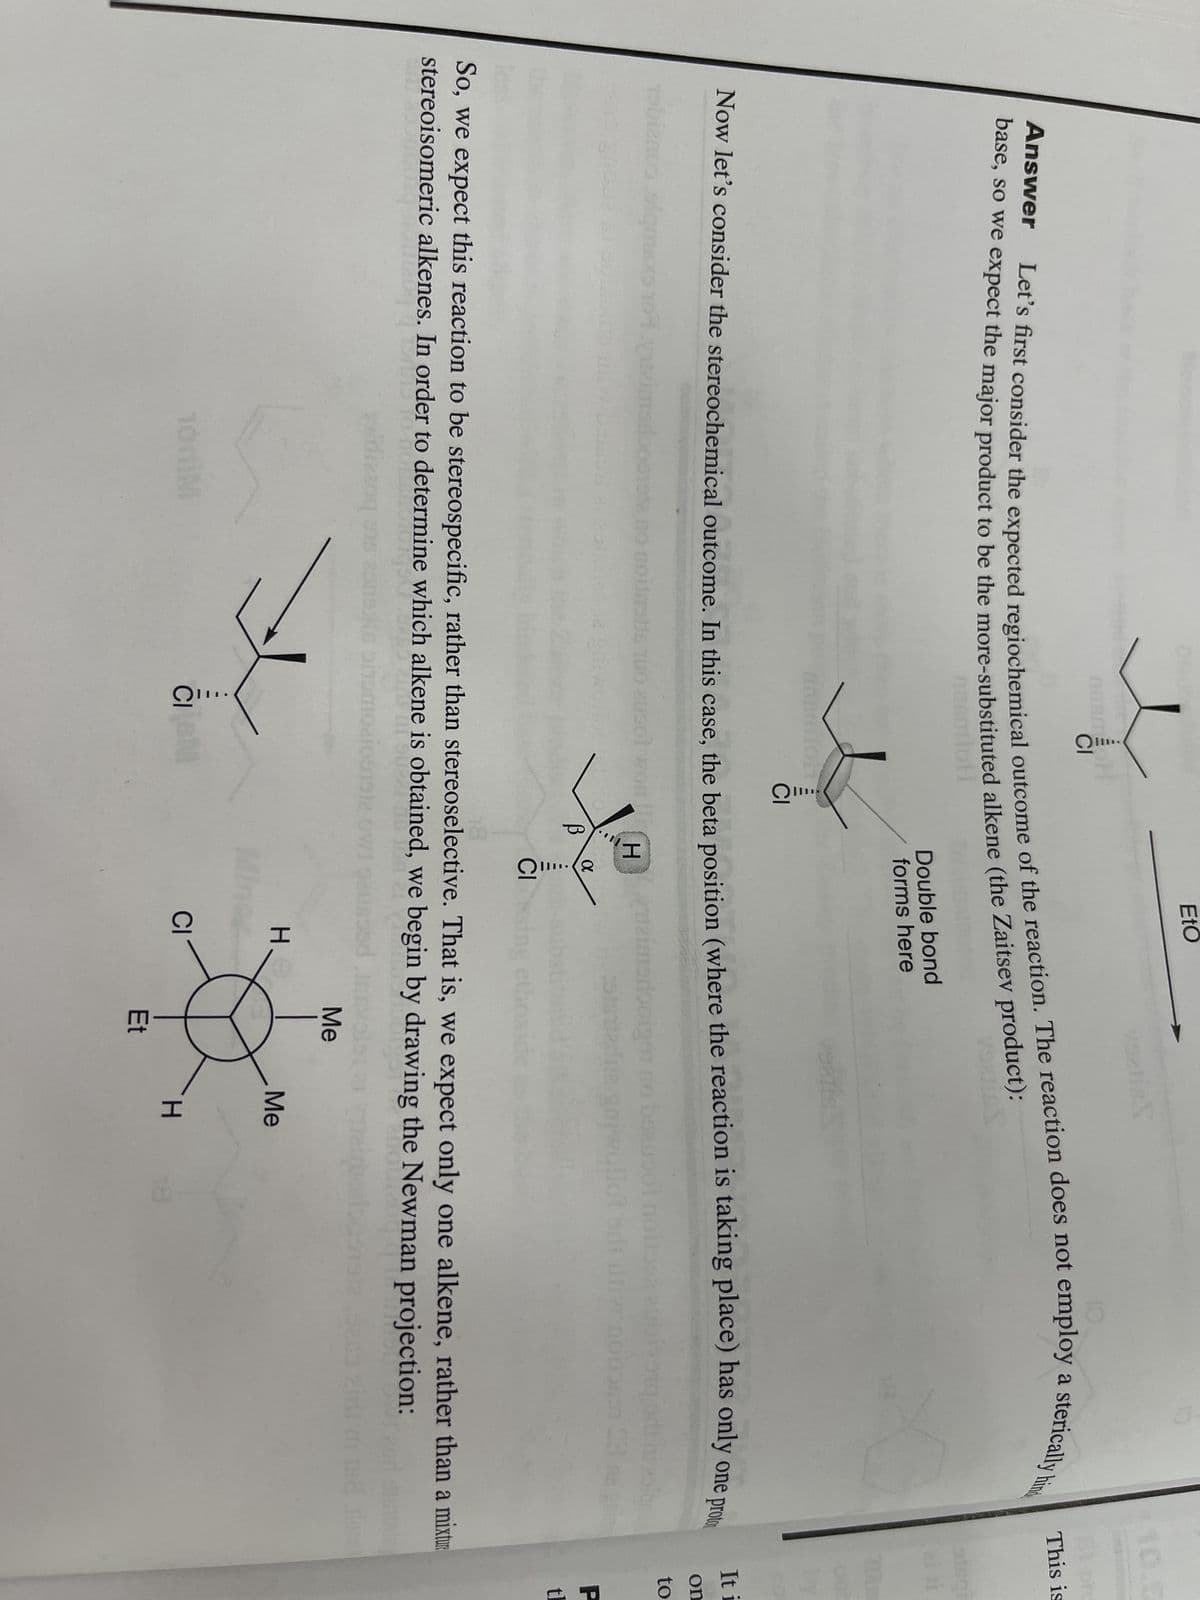 5302 84
Anam H
CI
Let's first consider the expected regiochemical outcome of the reaction. The reaction does not employ a sterically hind
Answer
base, so we expect the major product to be the more-substituted alkene (the Zaitsev product):
voeris
noomloti
no noitastis
100M
insmioh
Now let's consider the stereochemical outcome. In this case, the beta position (where the reaction is taking place) has only one prot
olqms
Heimodooigon
guiw
CI
ausol won
EtO
CIGM
В
Double bond
forms here
X
CIS
So, we expect this reaction to be stereospecific, rather than stereoselective. That is, we expect only one alkene, rather than a mixtur
stereoisomeric alkenes. In order to determine which alkene is obtained, we begin by drawing the Newman projection:
Crys.
dizzoq ens consulte smoa
H
CI
Me
Et
Me
This is
H
GIR
It i
on
to
P
tl